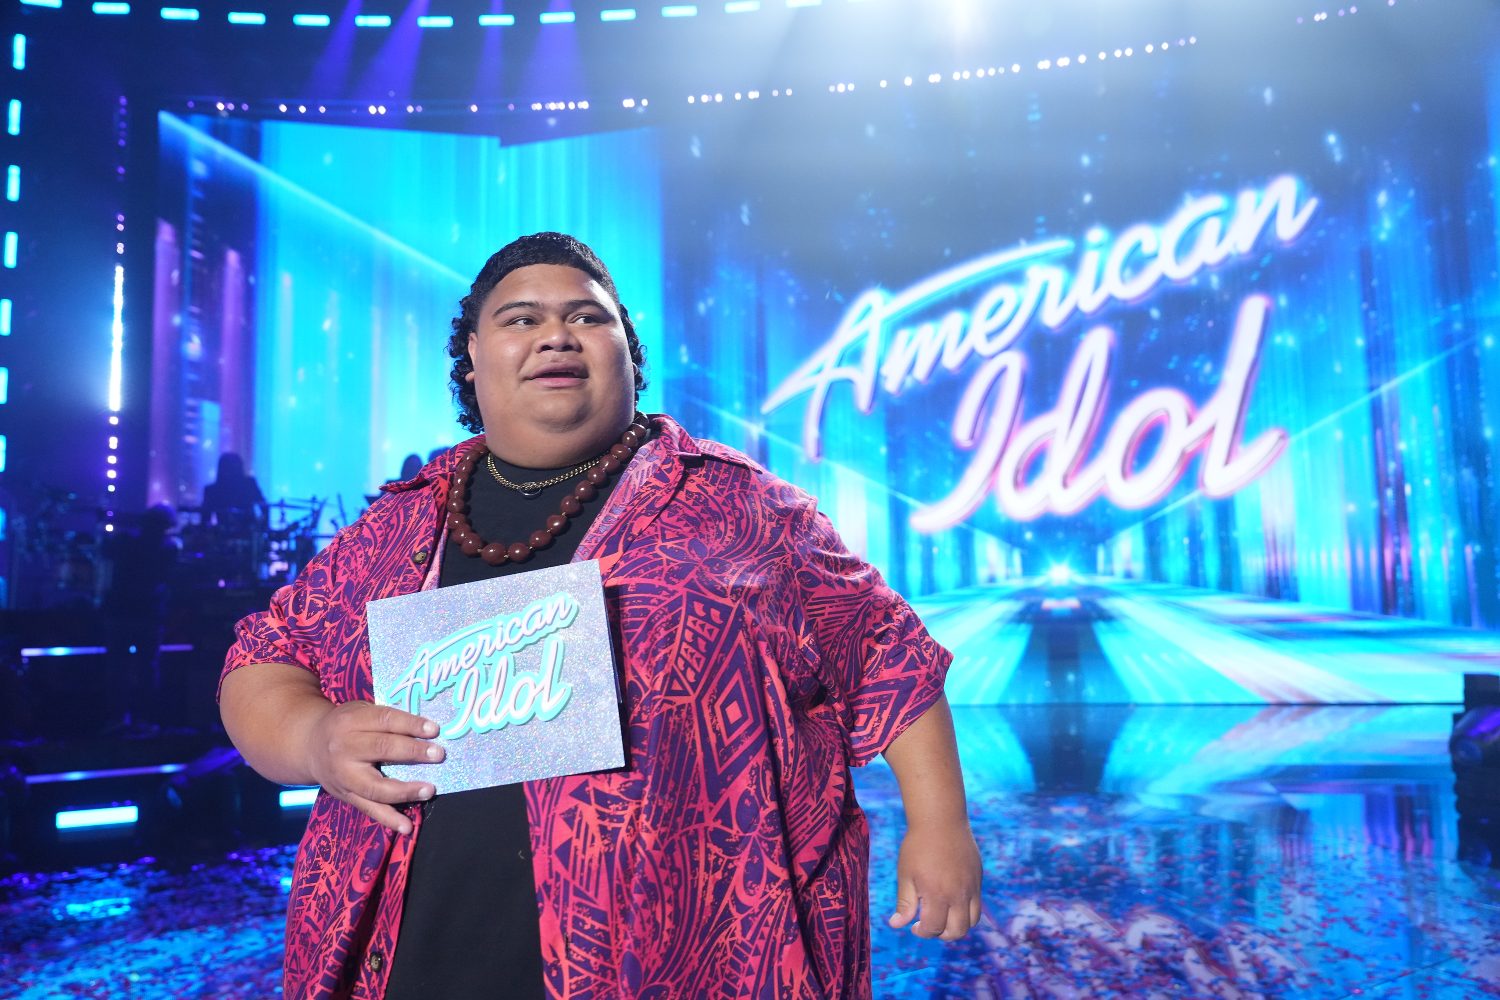 American Idol Fans Allegedly Claim Show Is Fixed